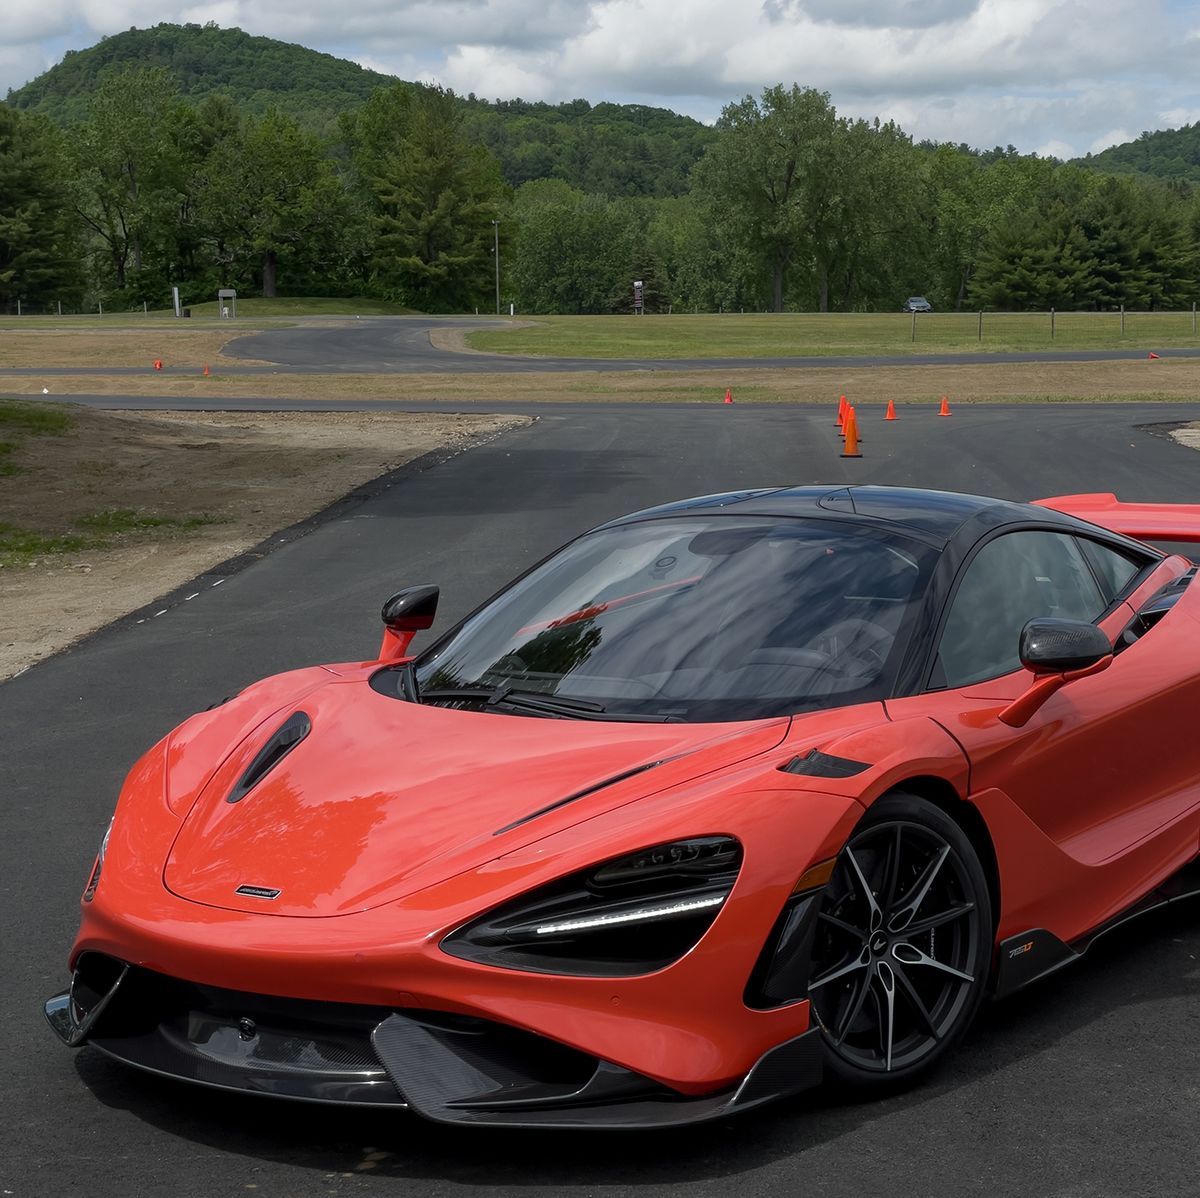 The 2021 McLaren 765LT Review: A Fighter Jet on Wheels